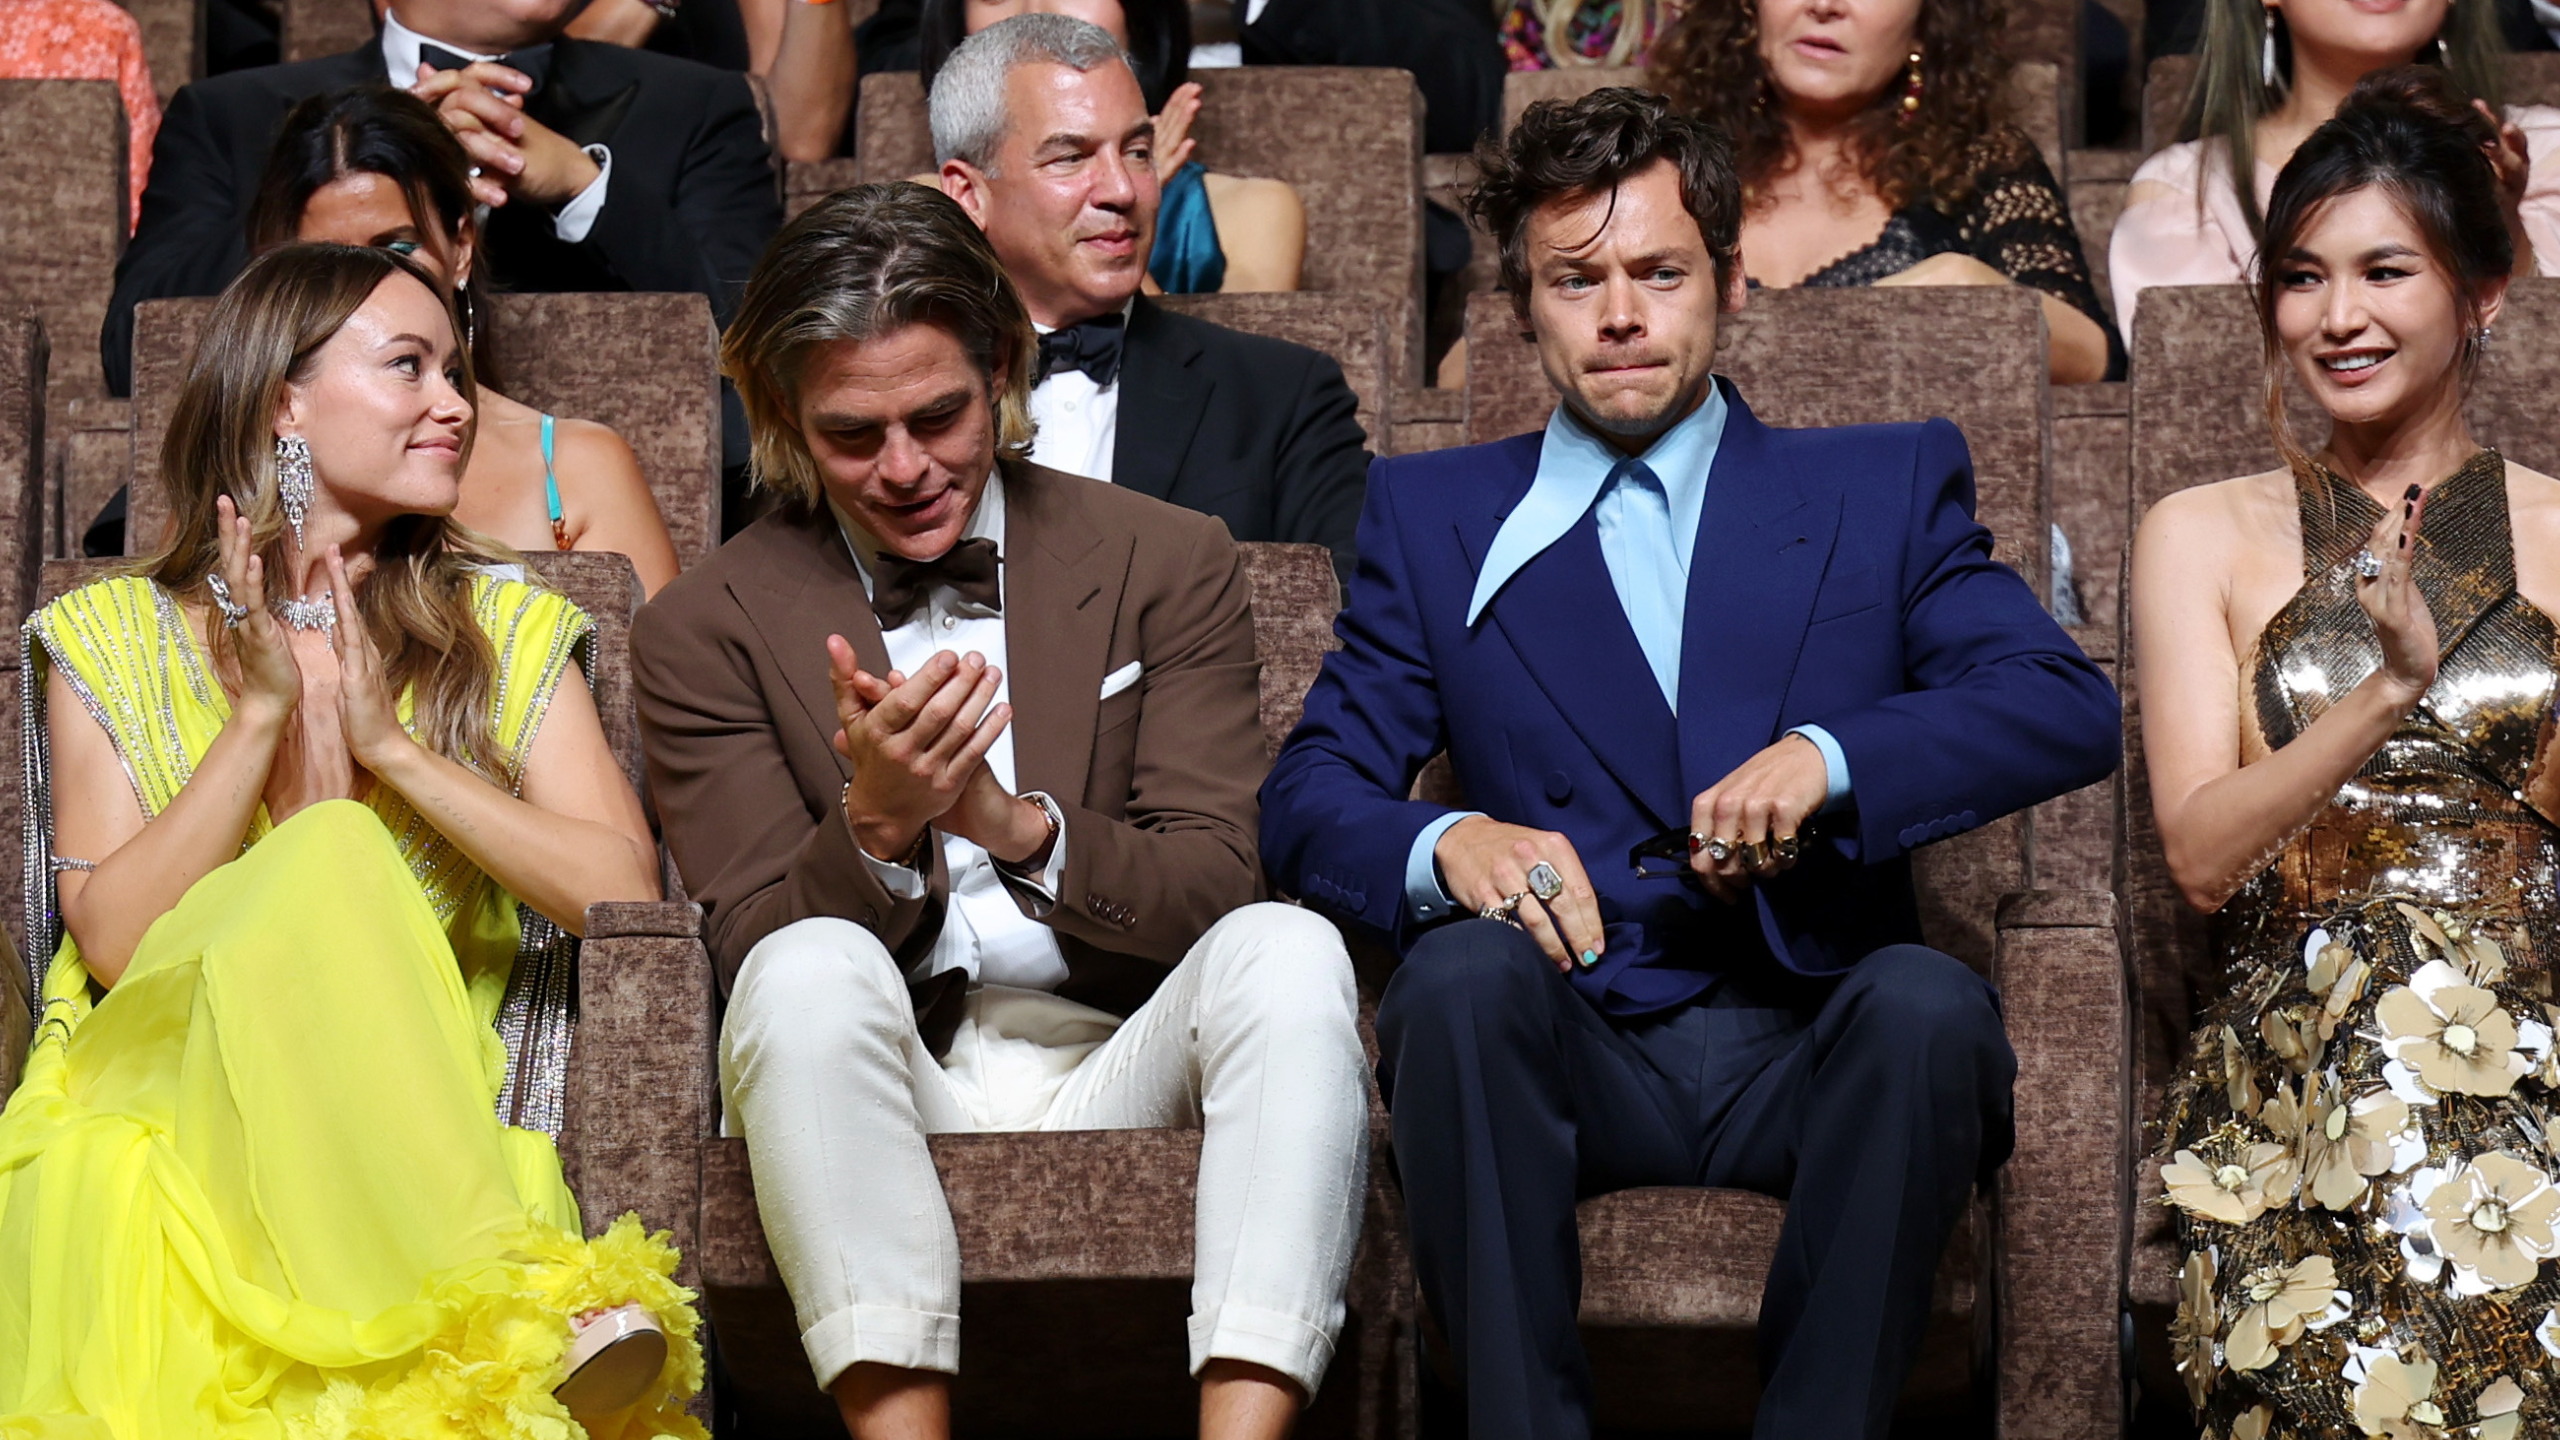 WATCH: Harry Styles Allegedly Spits on Co-Star Chris Pine During Venice Film Festival Premiere